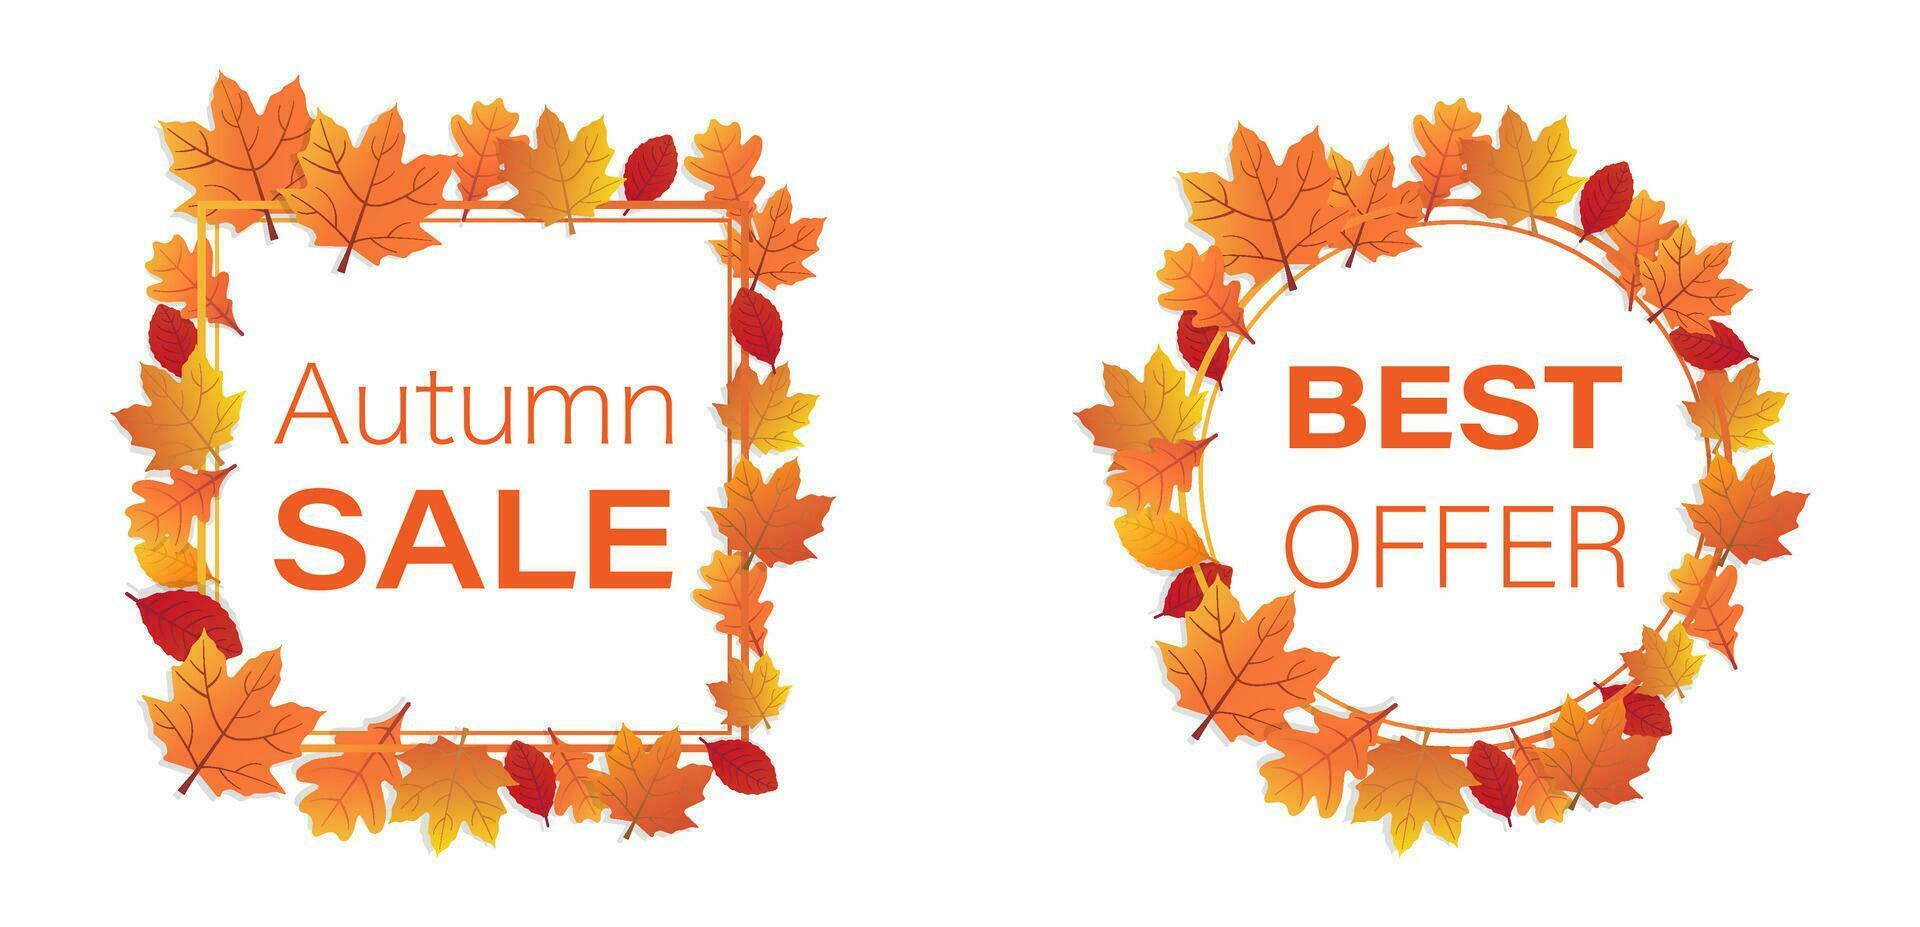 Autumn sale banner. Best offer in october. Square and round poster. Fall clearance with colorful frame. Leaves banner in gradient. Promotion wallpaper on white background. Vector EPS 10.